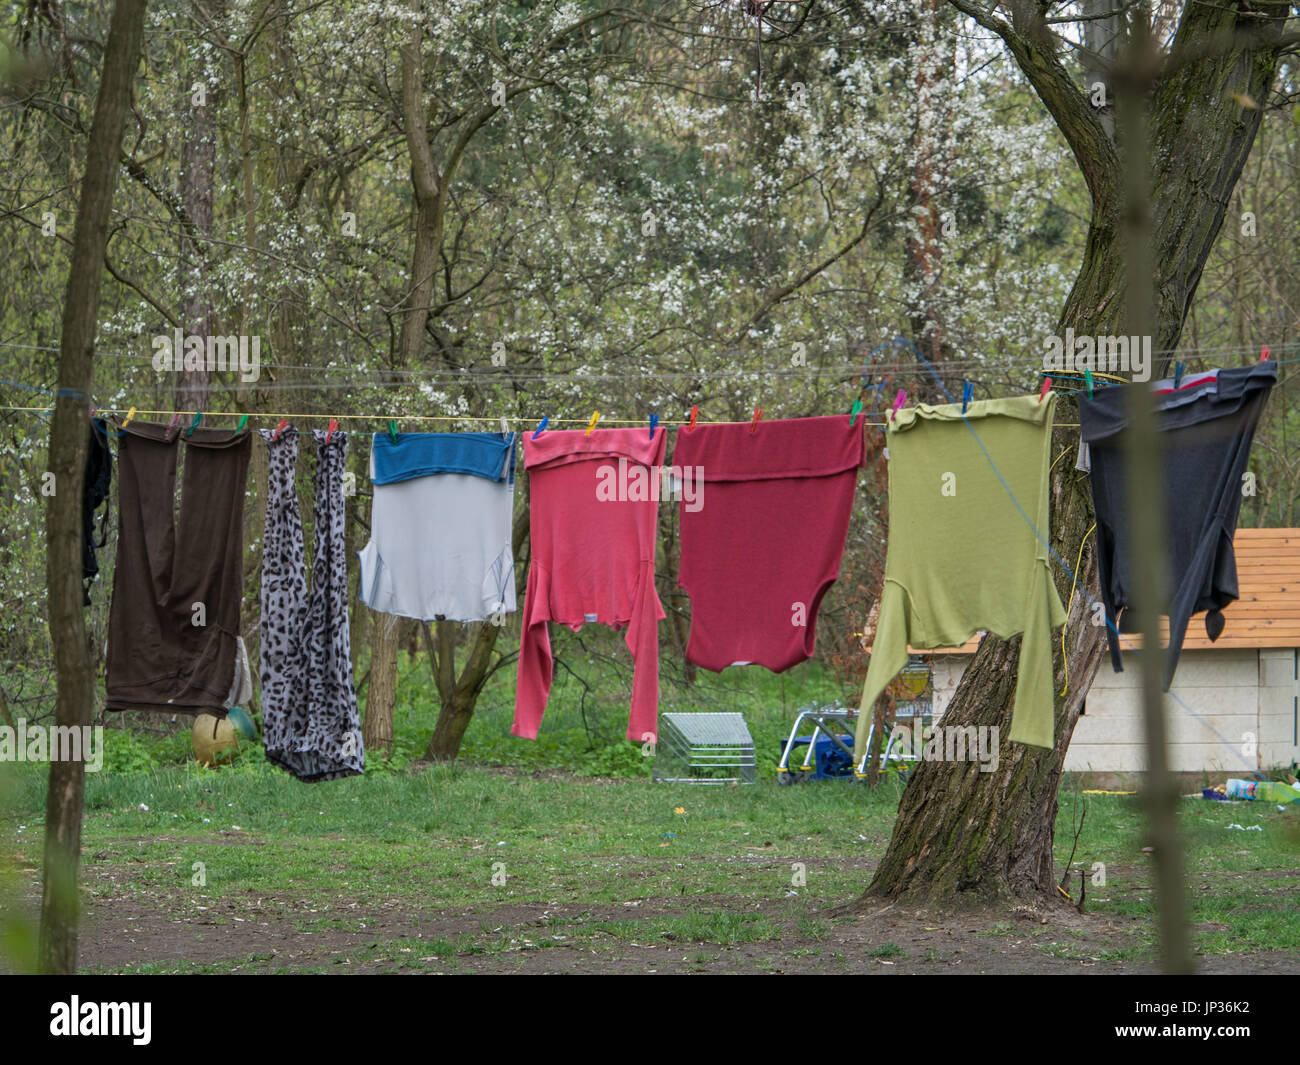 Colourful laundry clothes drying in the garden Stock Photo